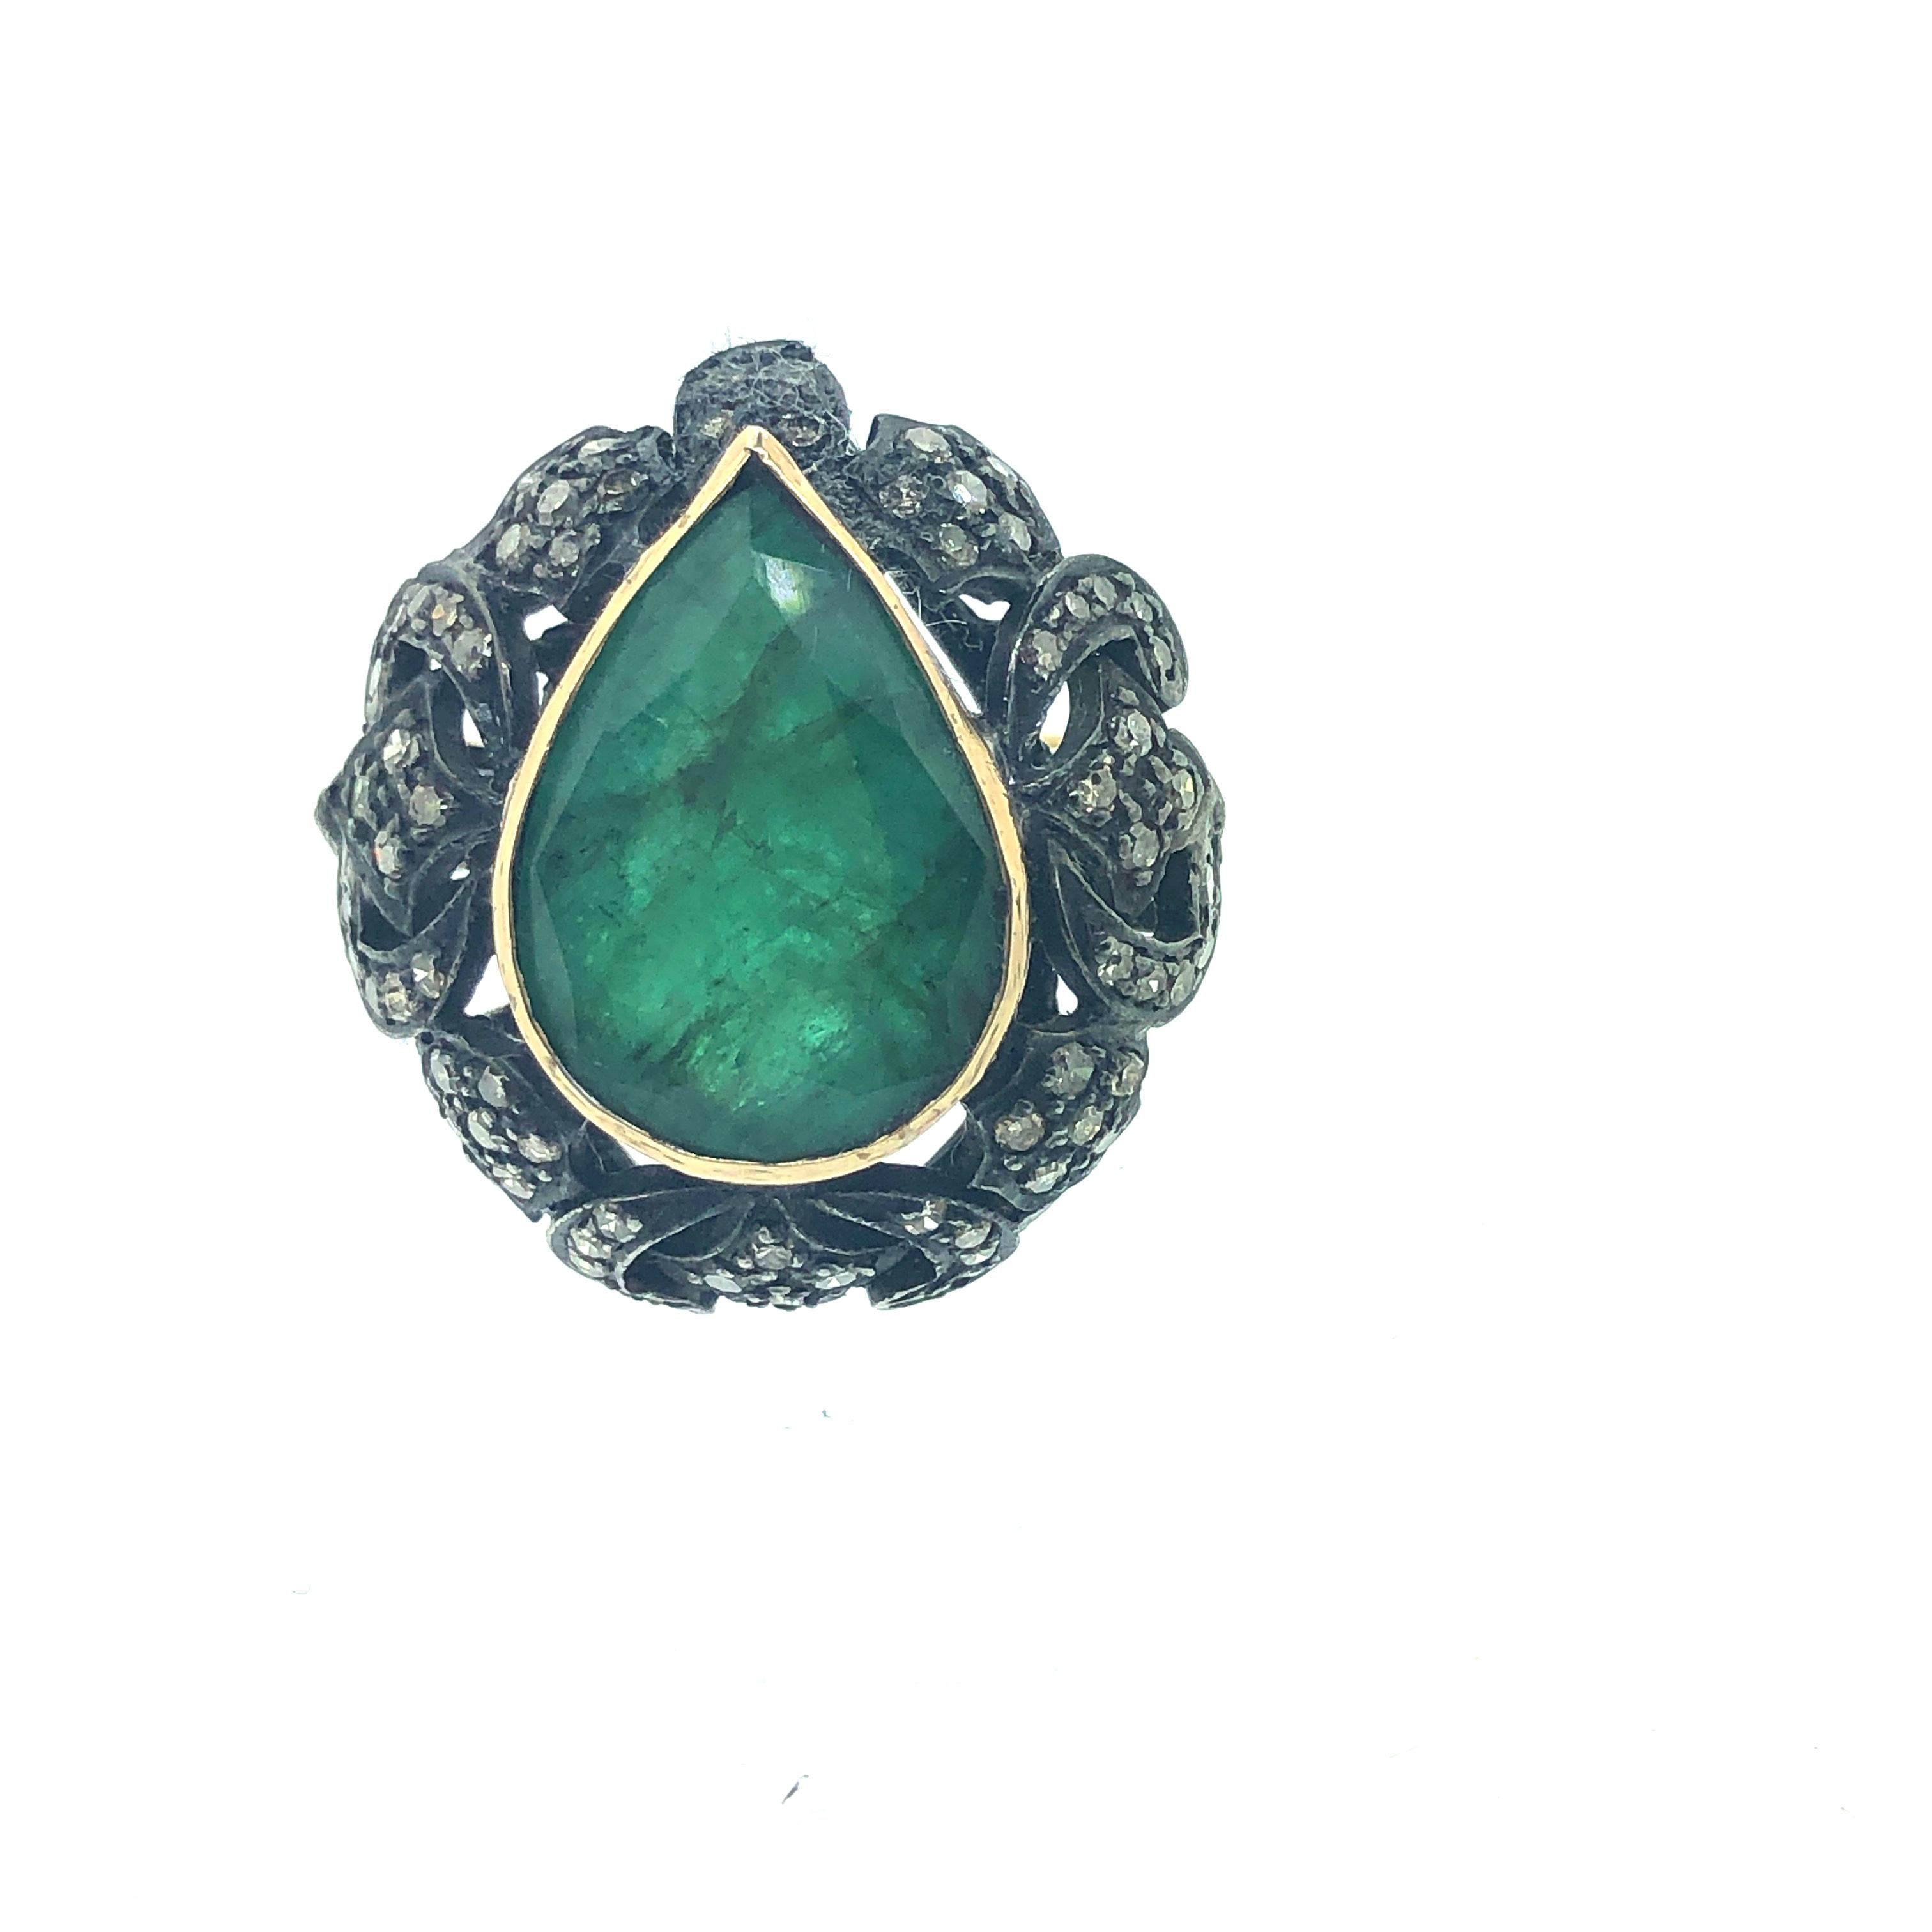 6.75 Size 8.90ct Emerald, 0.90ct Diamond Ring in Oxidized Sterling Silver, 18k Gold. The beautiful emerald in pear shape is set in the center with diamonds all around it. The emerald is bezel set with 18K Gold. The ring shank is made with 18K Gold